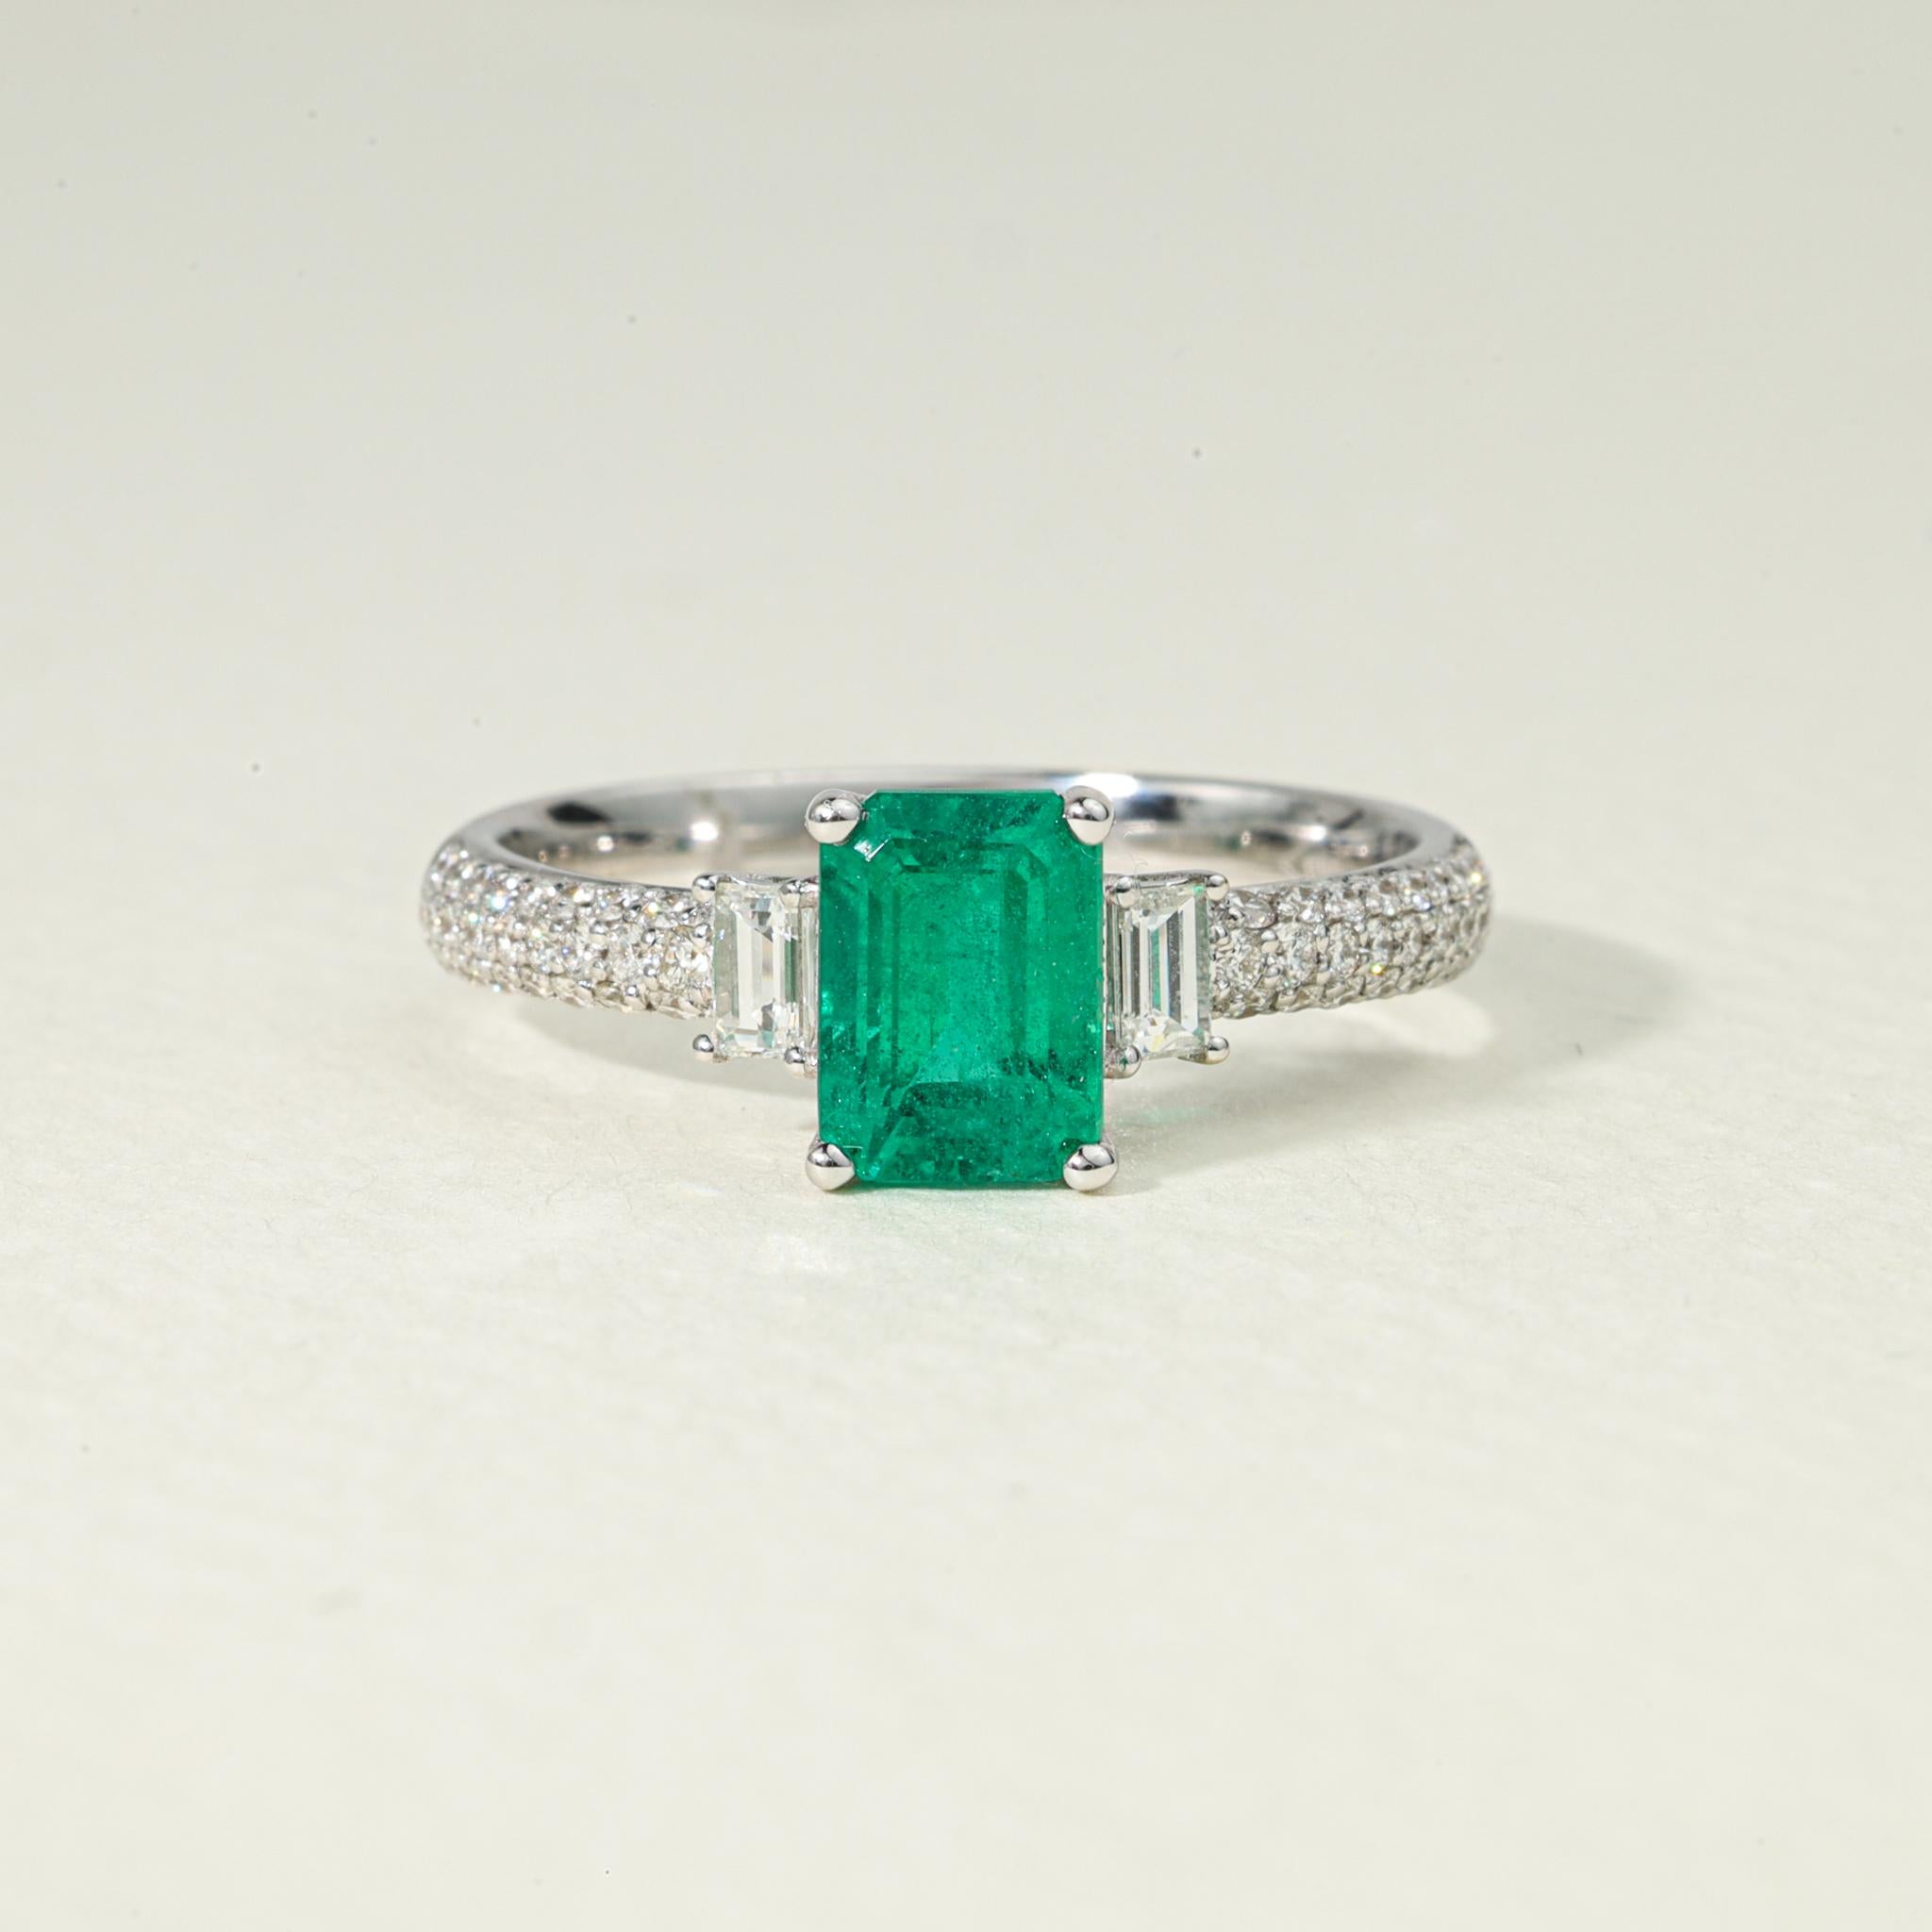 Emerald Cut Natural Emerald Diamond Cocktail Engagement Ring 18k White Gold

Available in 18k white gold.

Same design can be made also with other custom gemstones per request.

Product details:

- Solid gold

- Diamond - approx. 0.50 carat

-